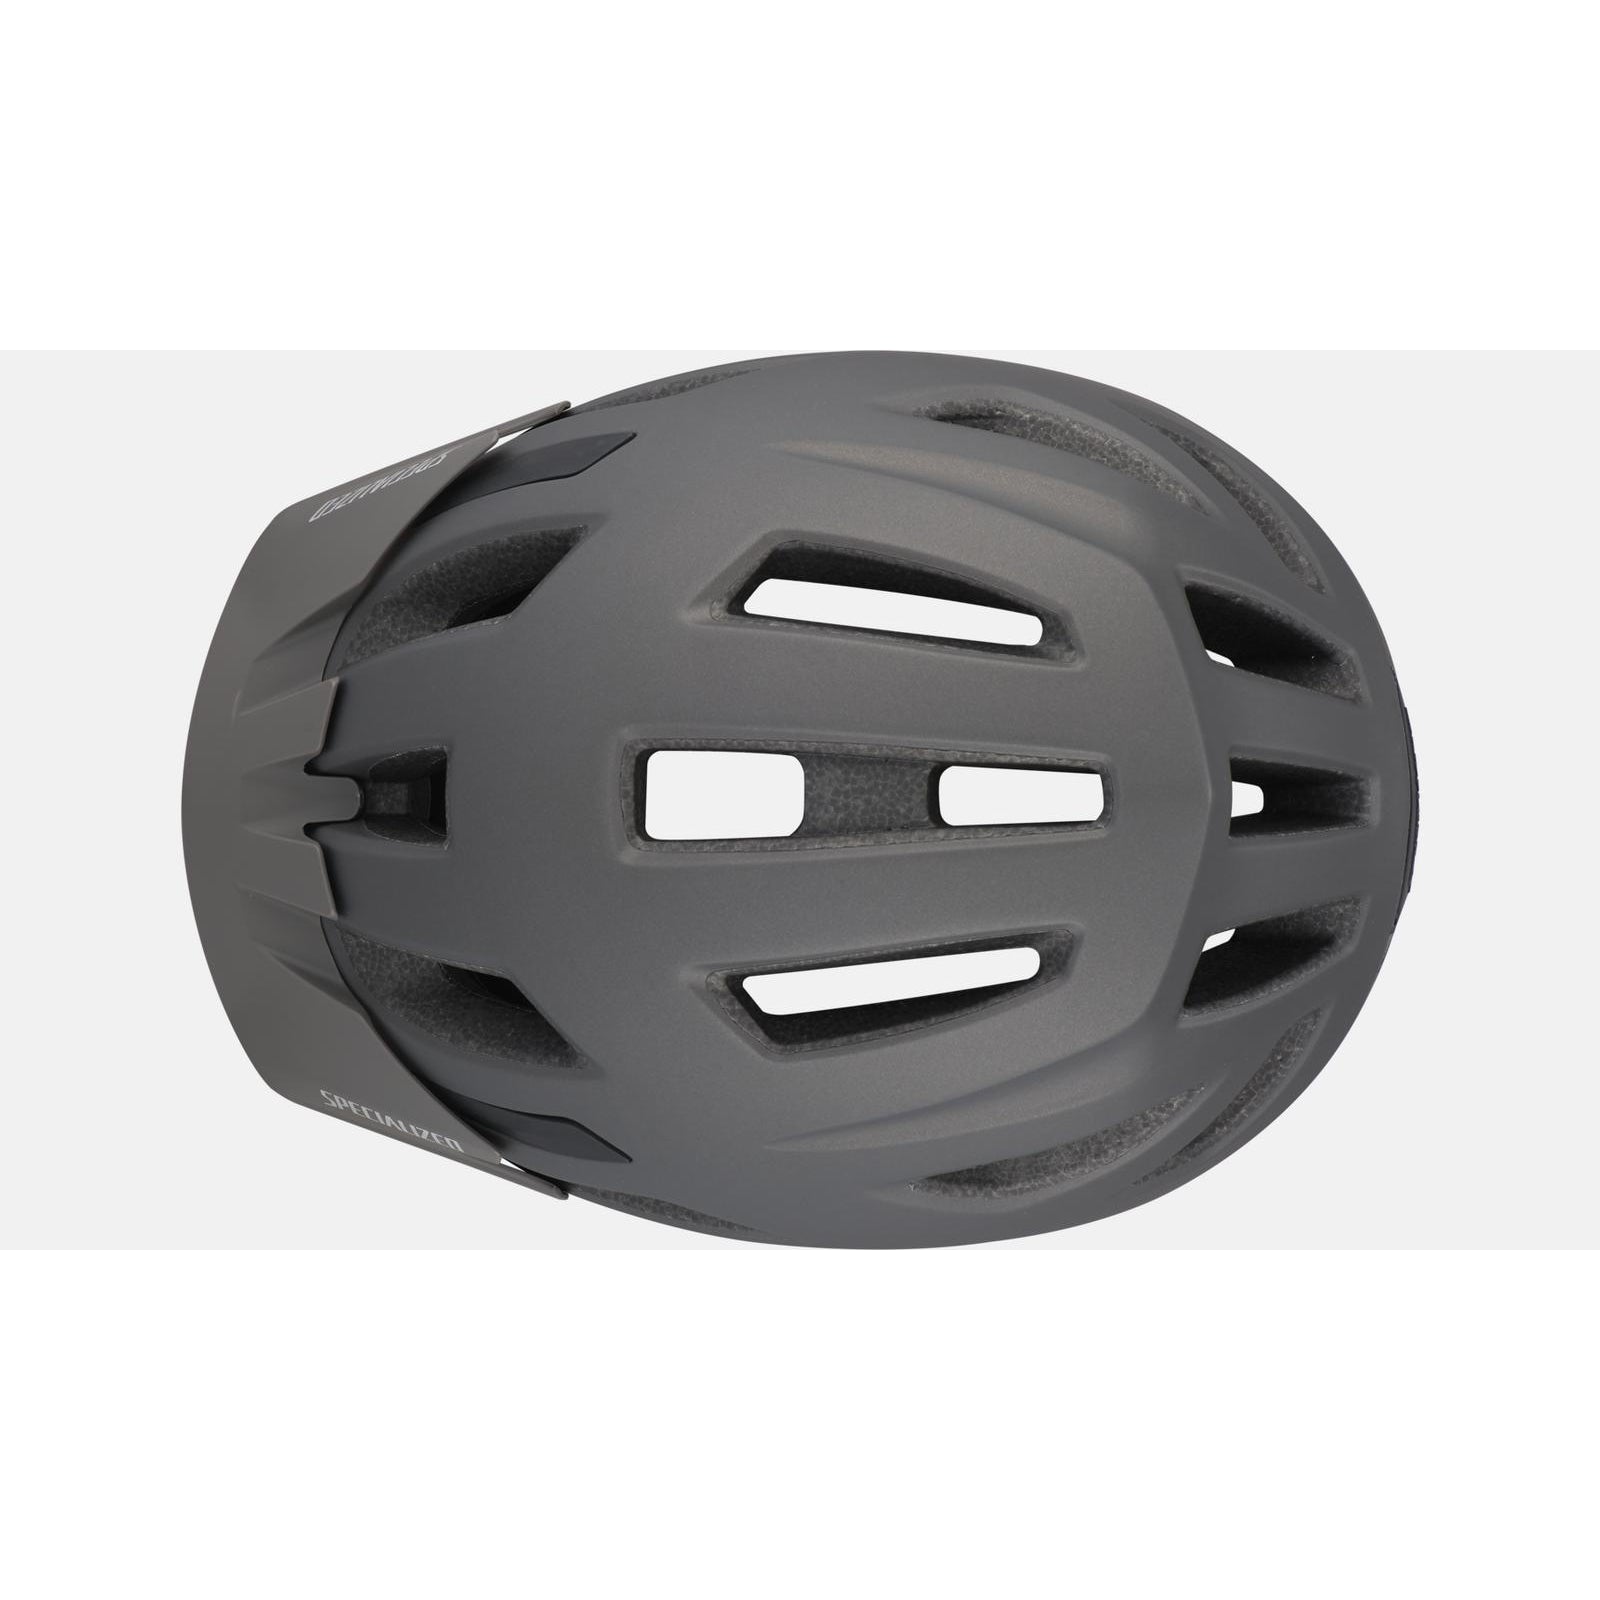 Specialized Shuffle Youth Standard Buckle - Helmets - Bicycle Warehouse